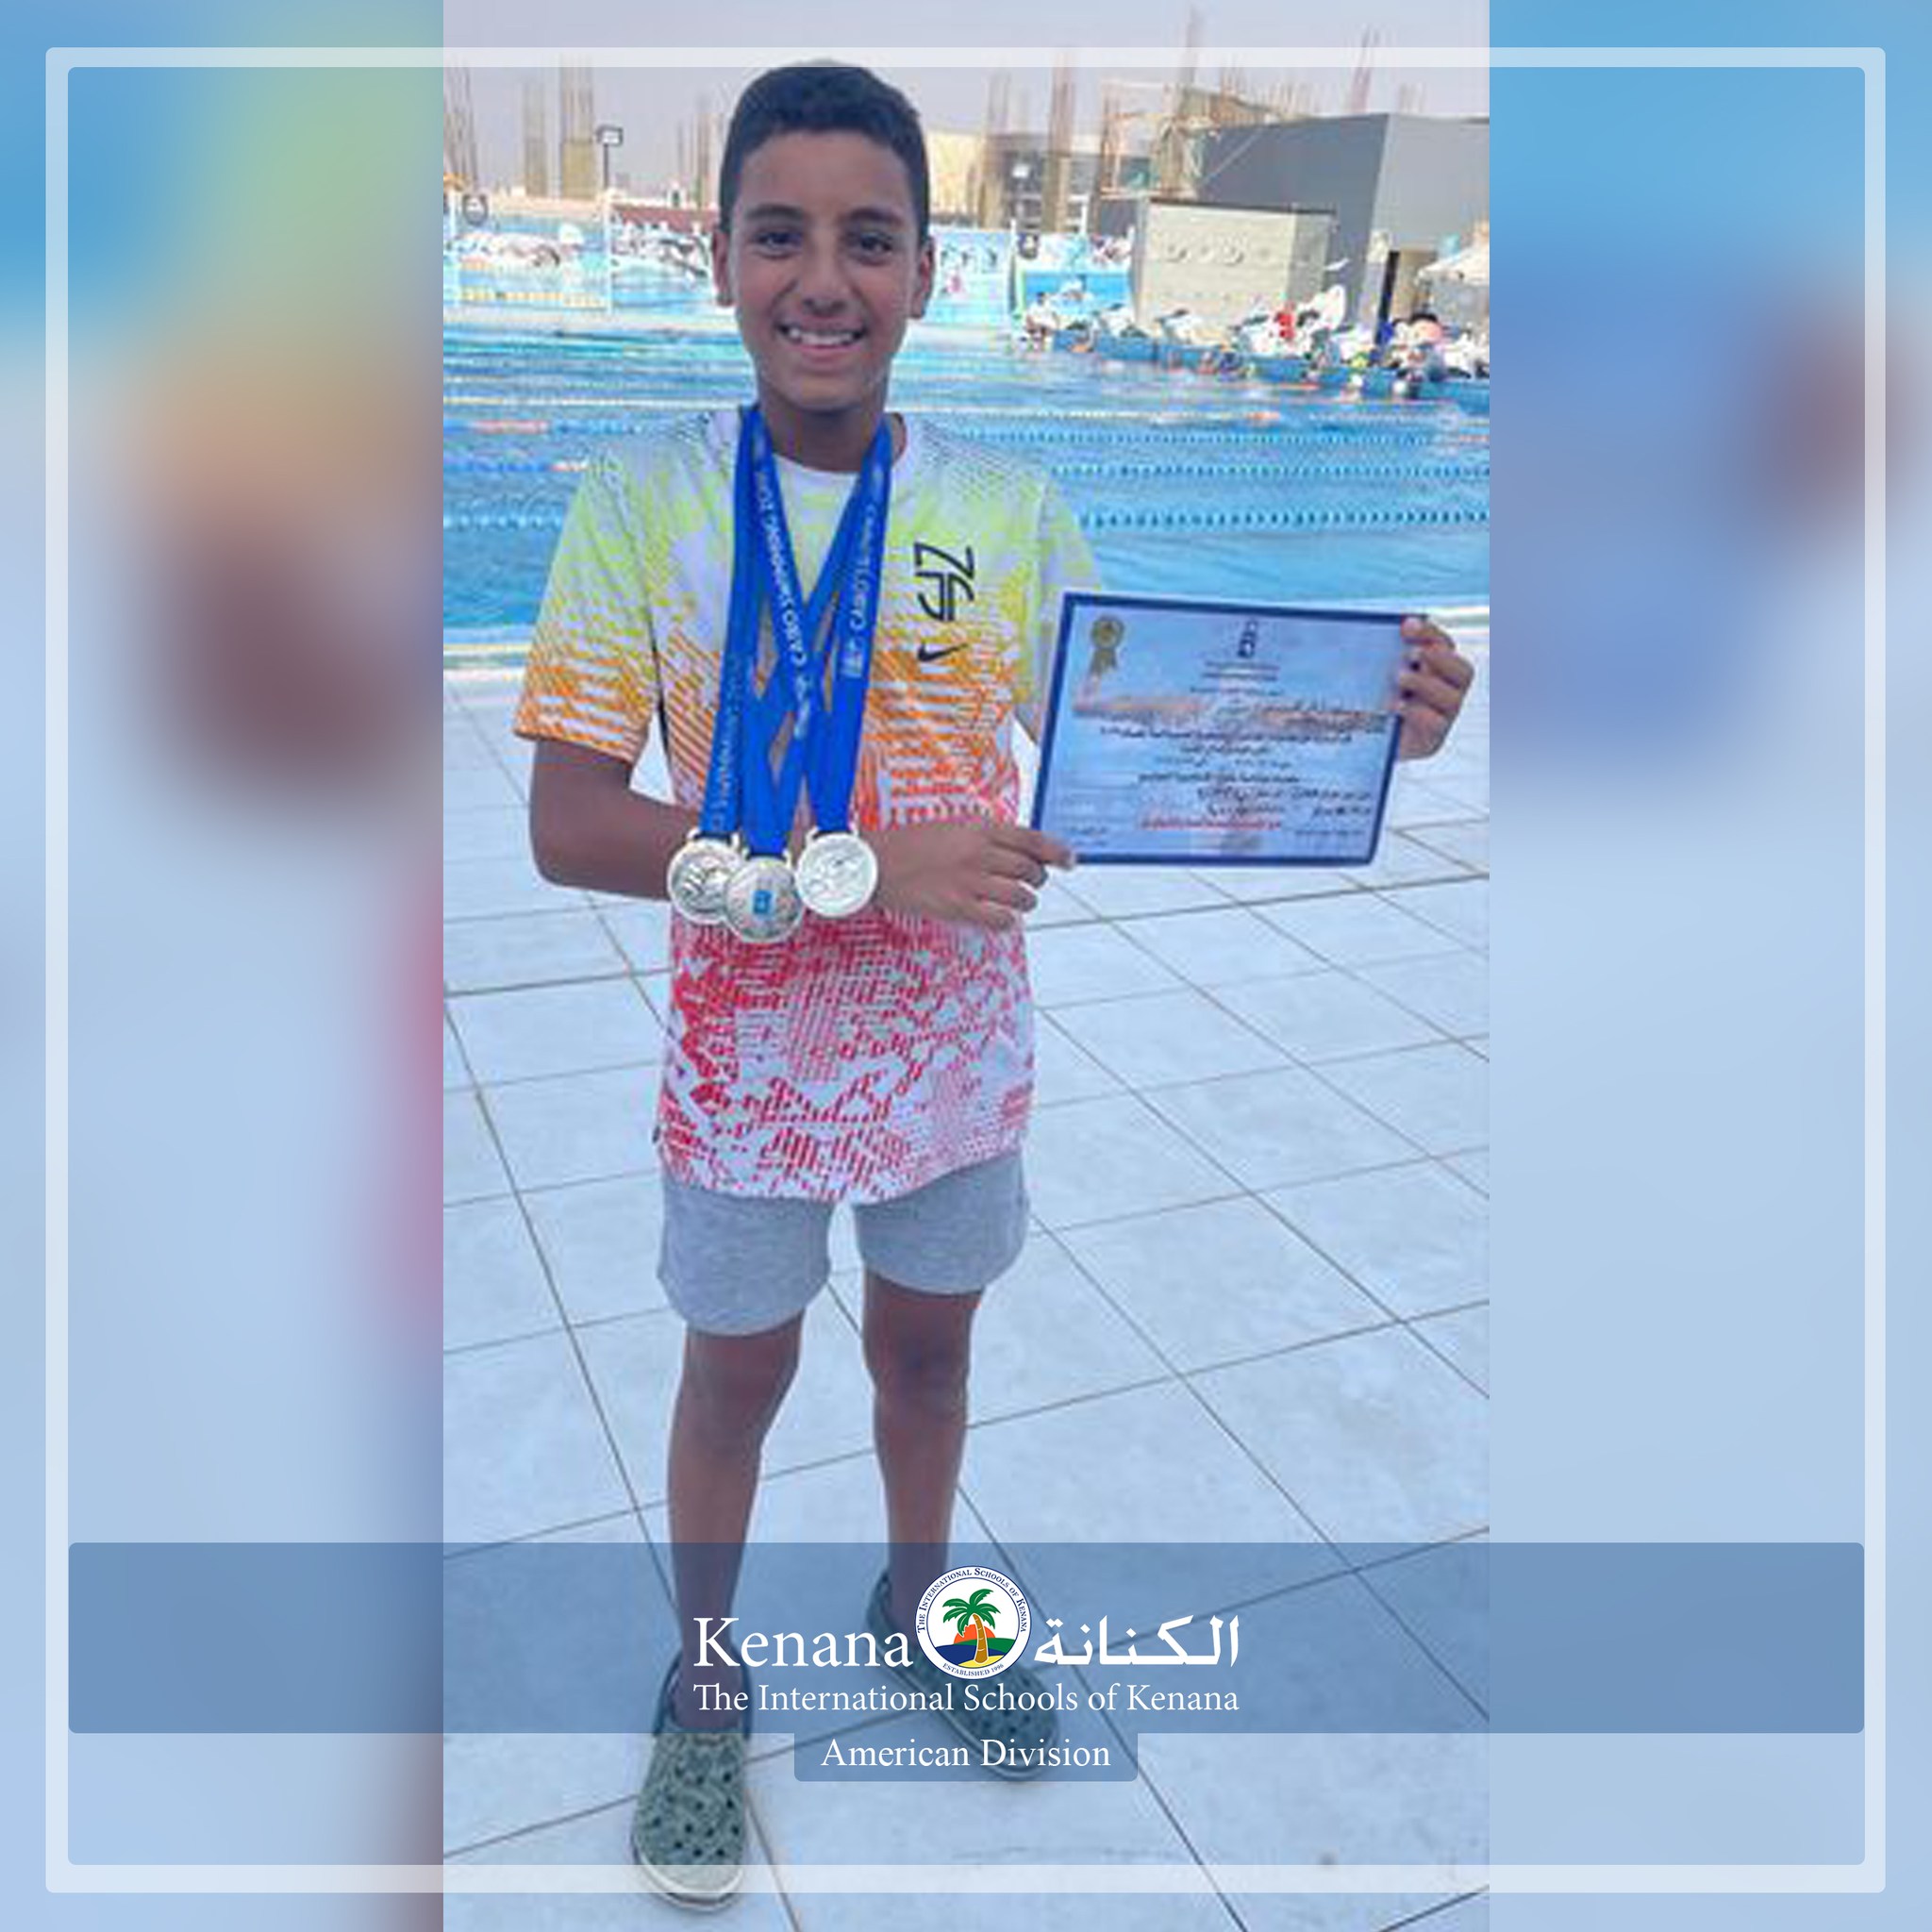 The International Schools of Kenana would like to congratulate Youssef Ramez for achieving the 2nd place in medley and free swimming